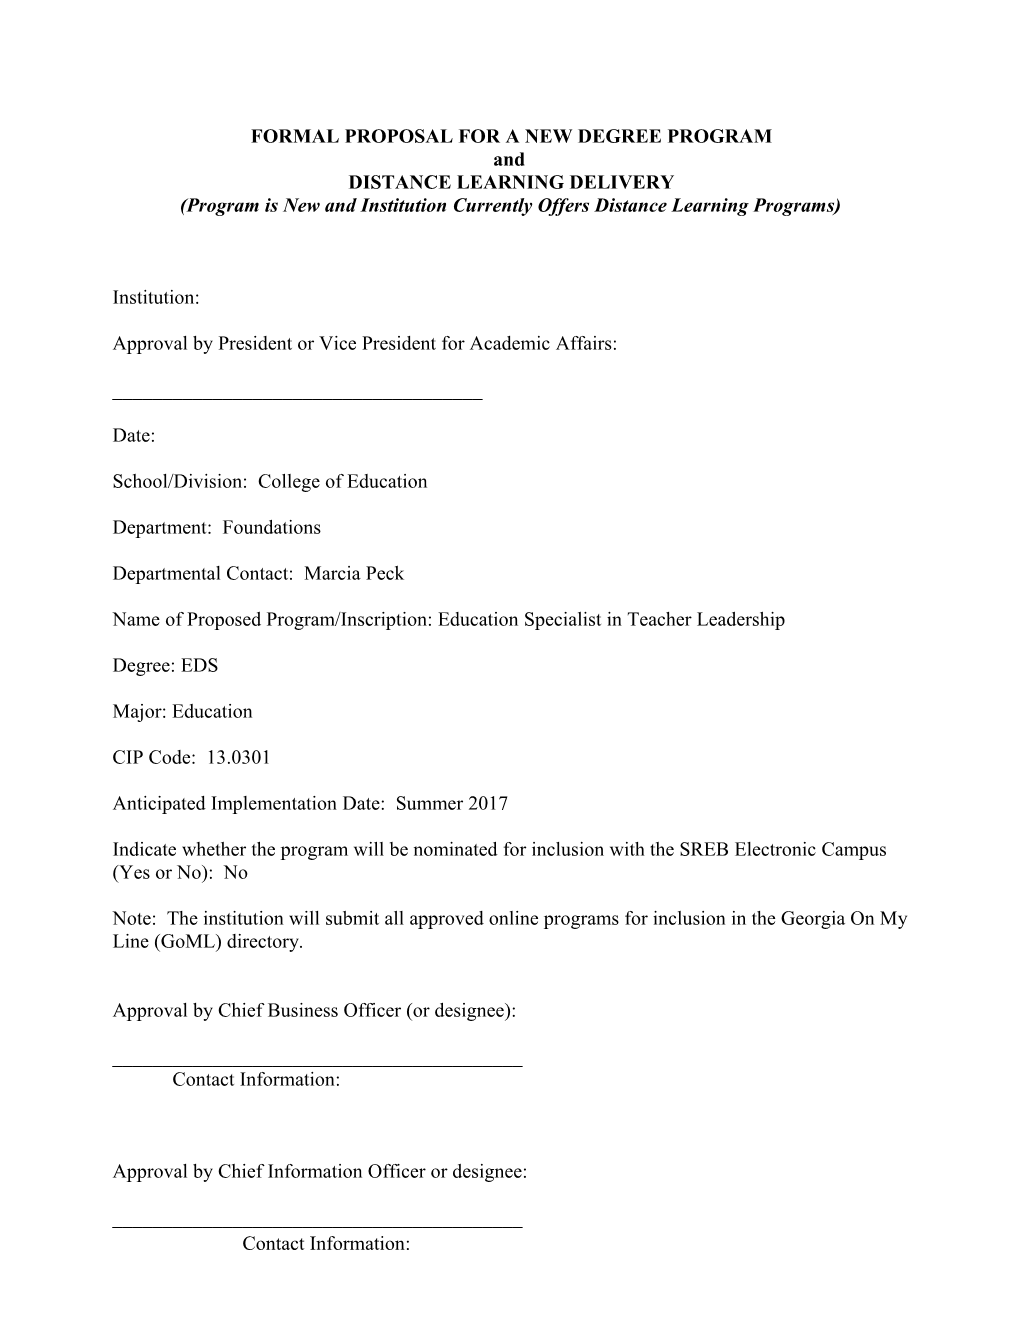 Formal Proposal for a New Degree Program